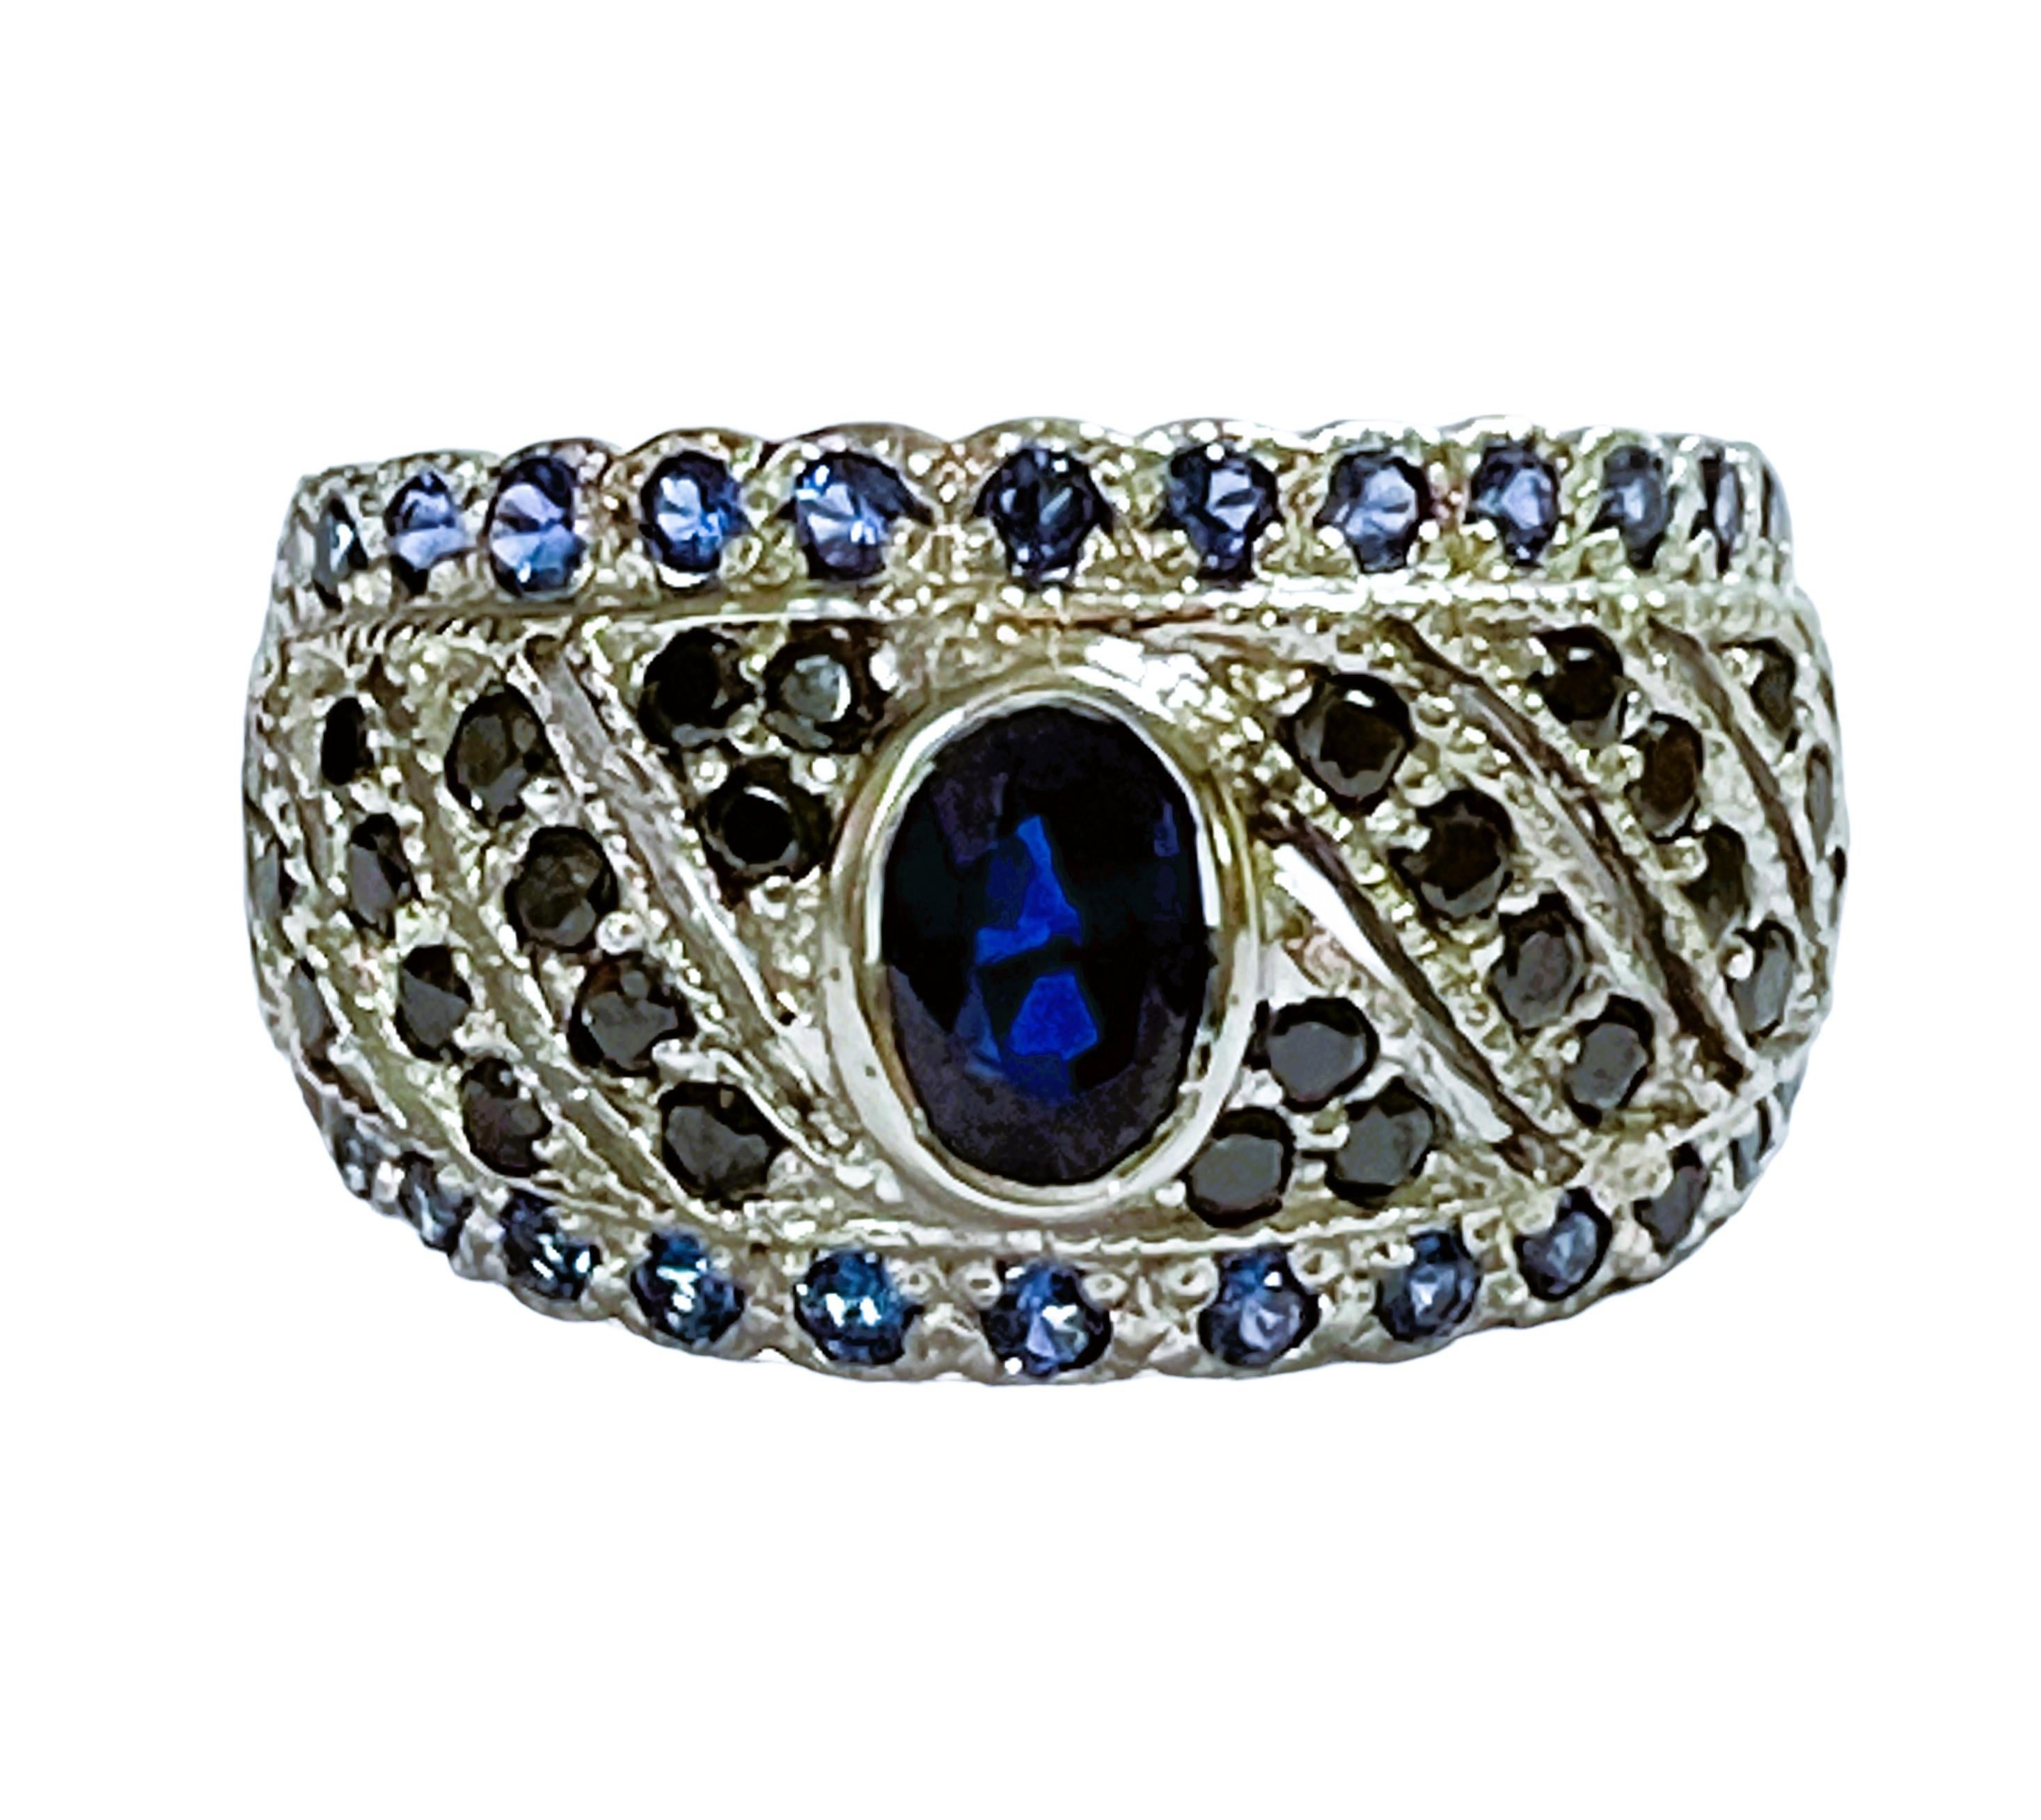 What a beautiful ring!  The ring is a size 6.75.  The stones are from Africa and are just exquisite.  The 